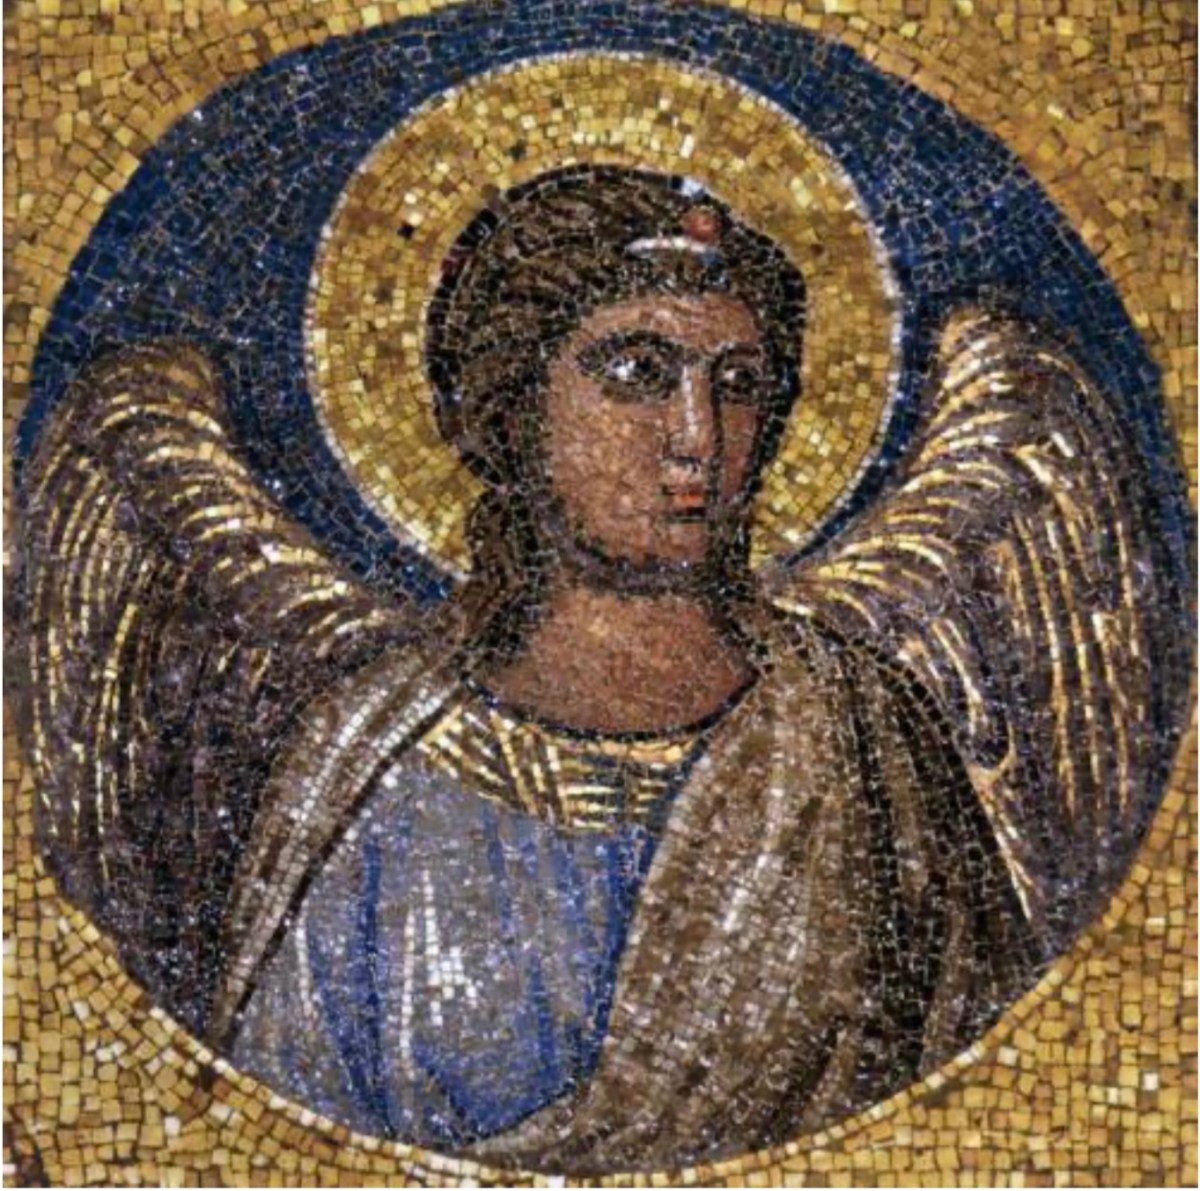 A fragment of a mosaic from Giotto of an angel